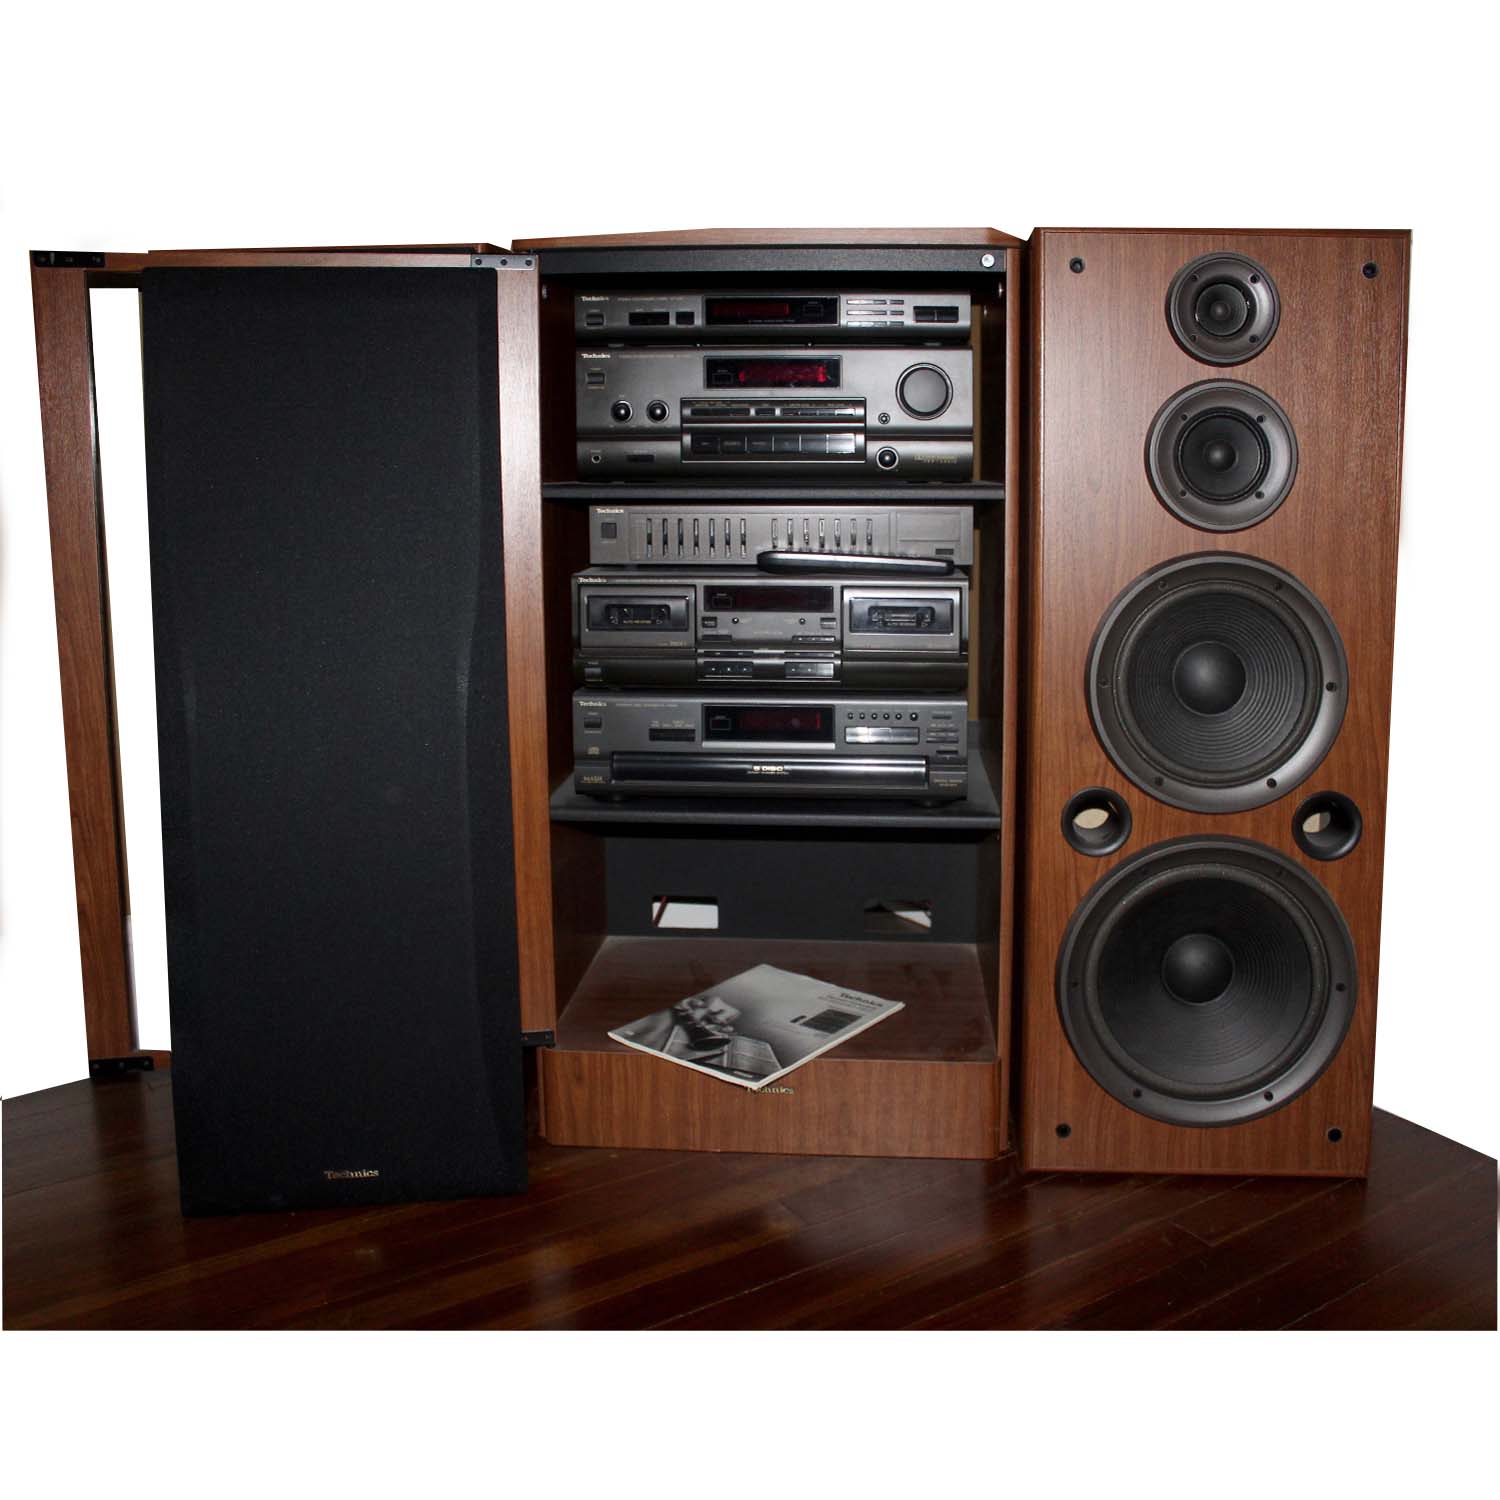 Vintage Technics Stereo System, Cabinet and Speakers | EBTH